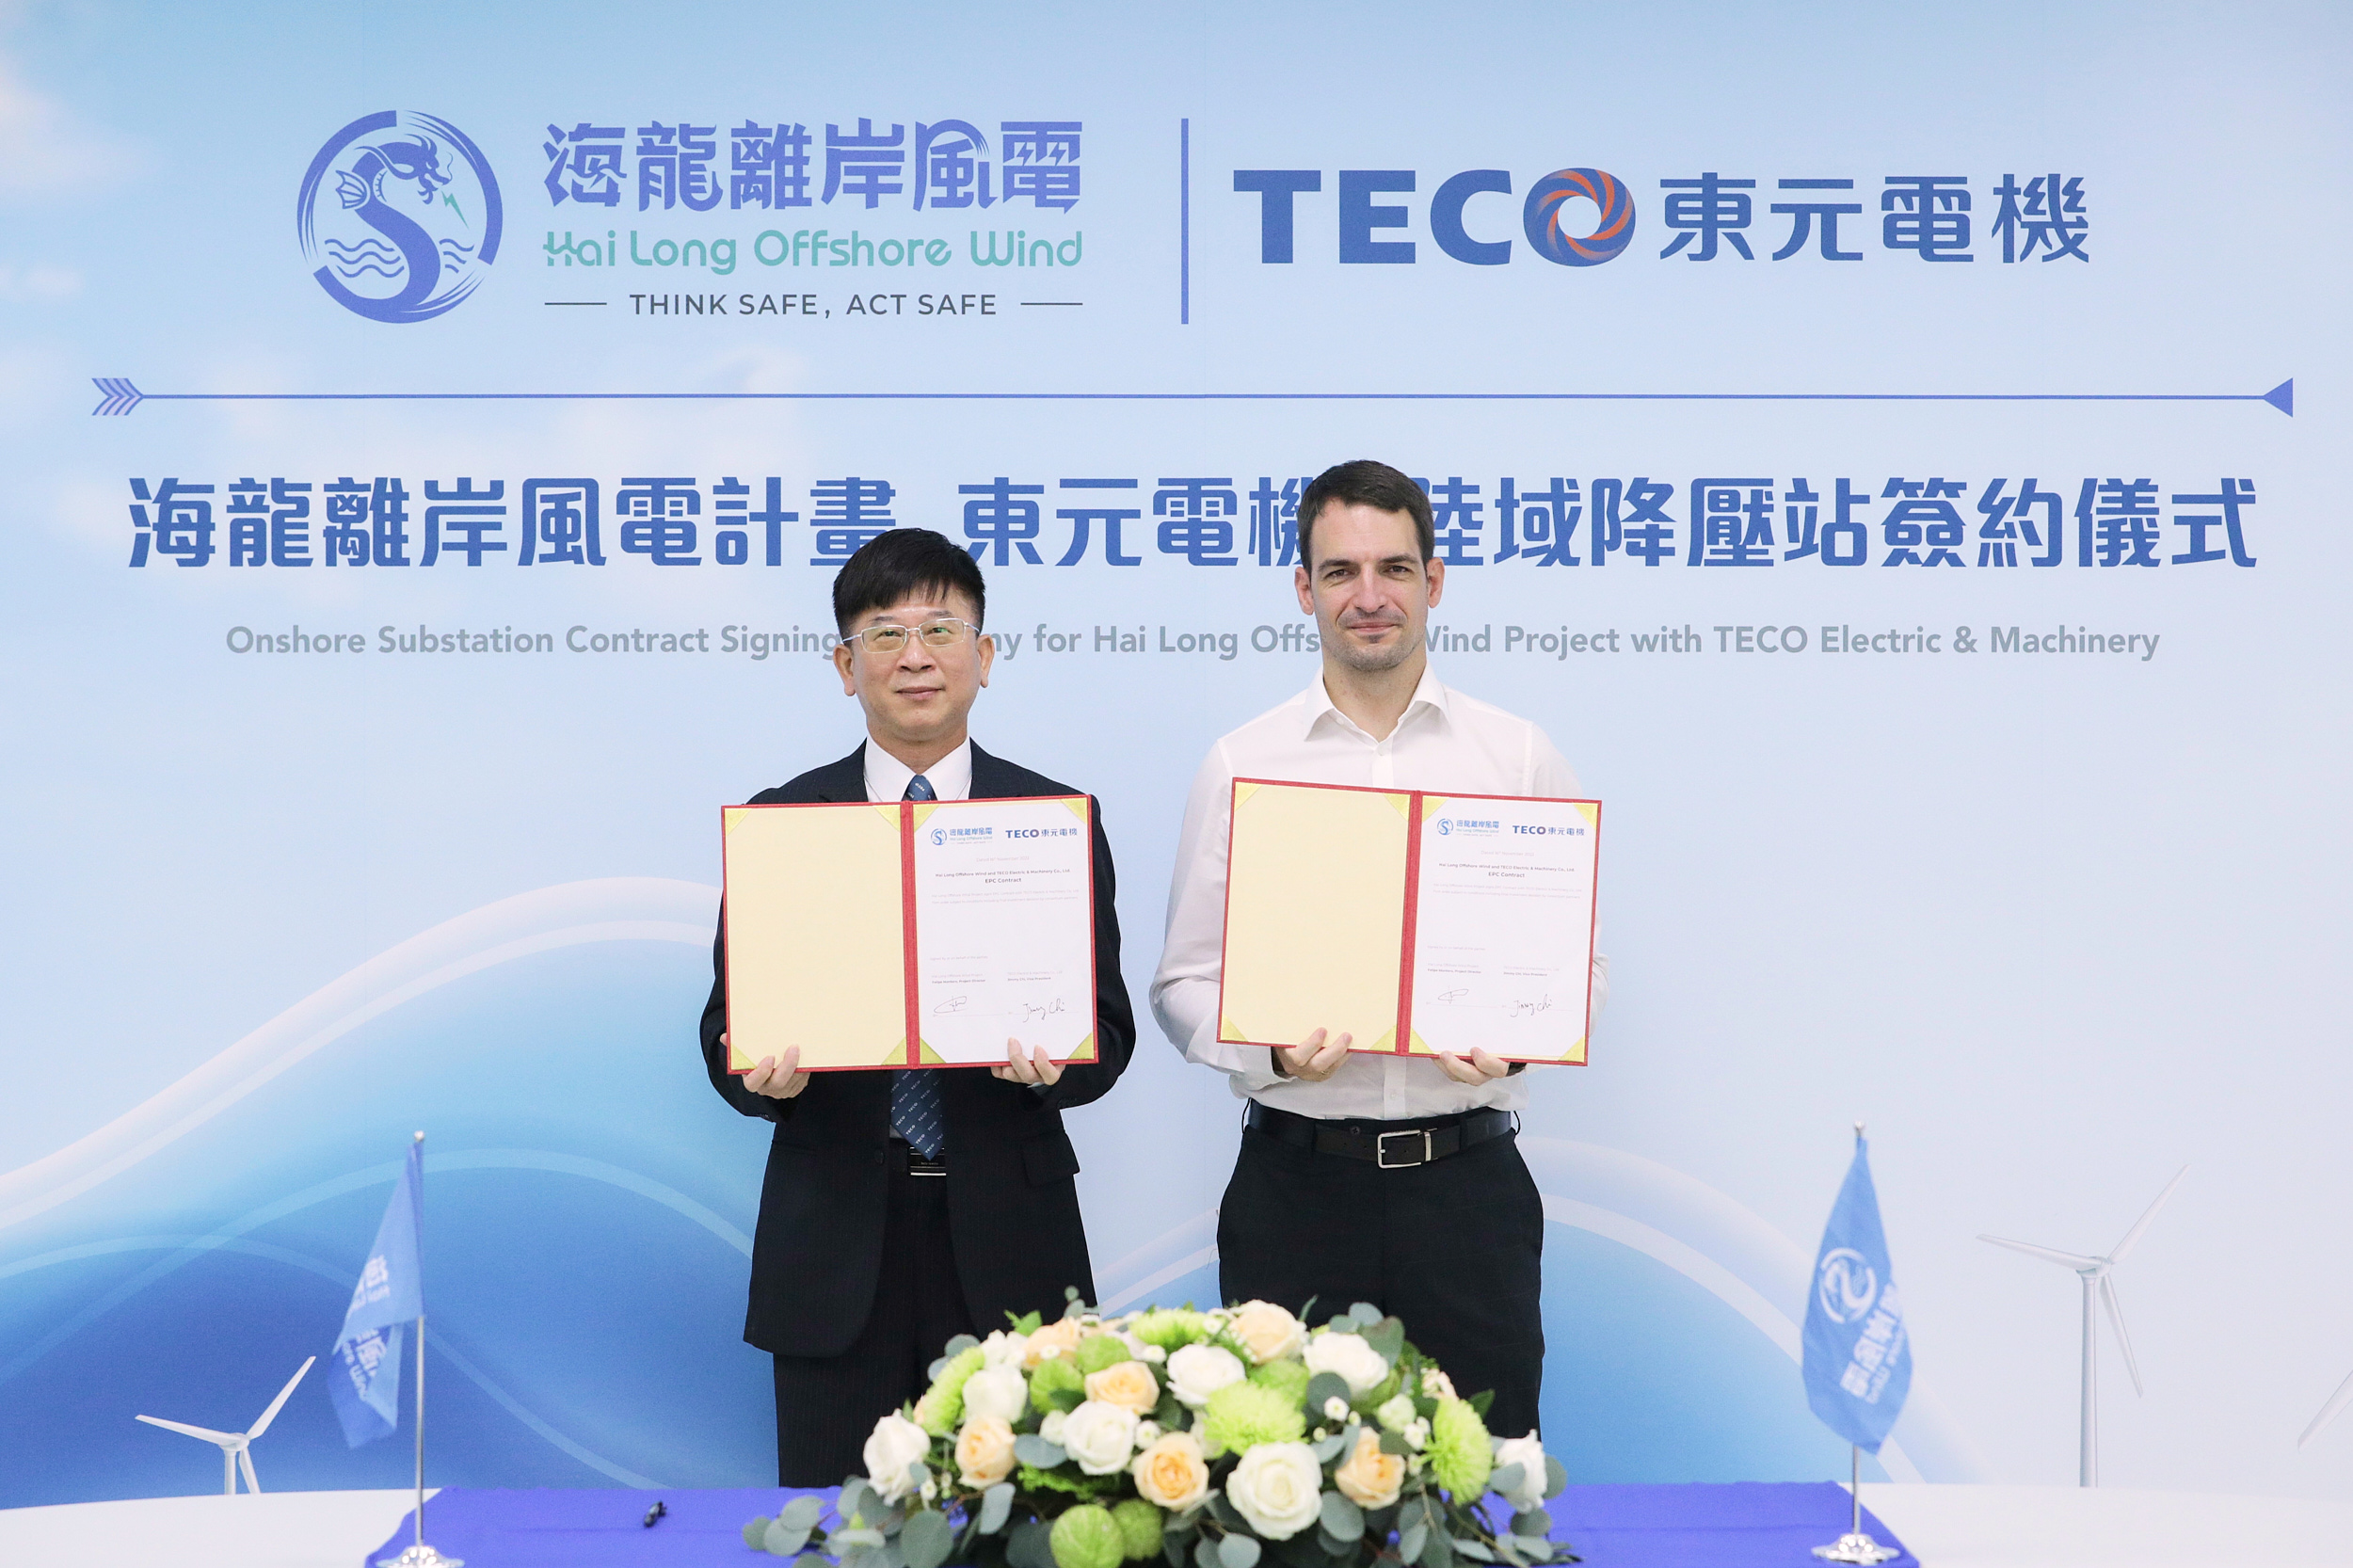 Largest Installed Capacity in Taiwan Ever: Hai Long, TECO Sign EPC Contract for Onshore Substation, Going Beyond Localization Commitments